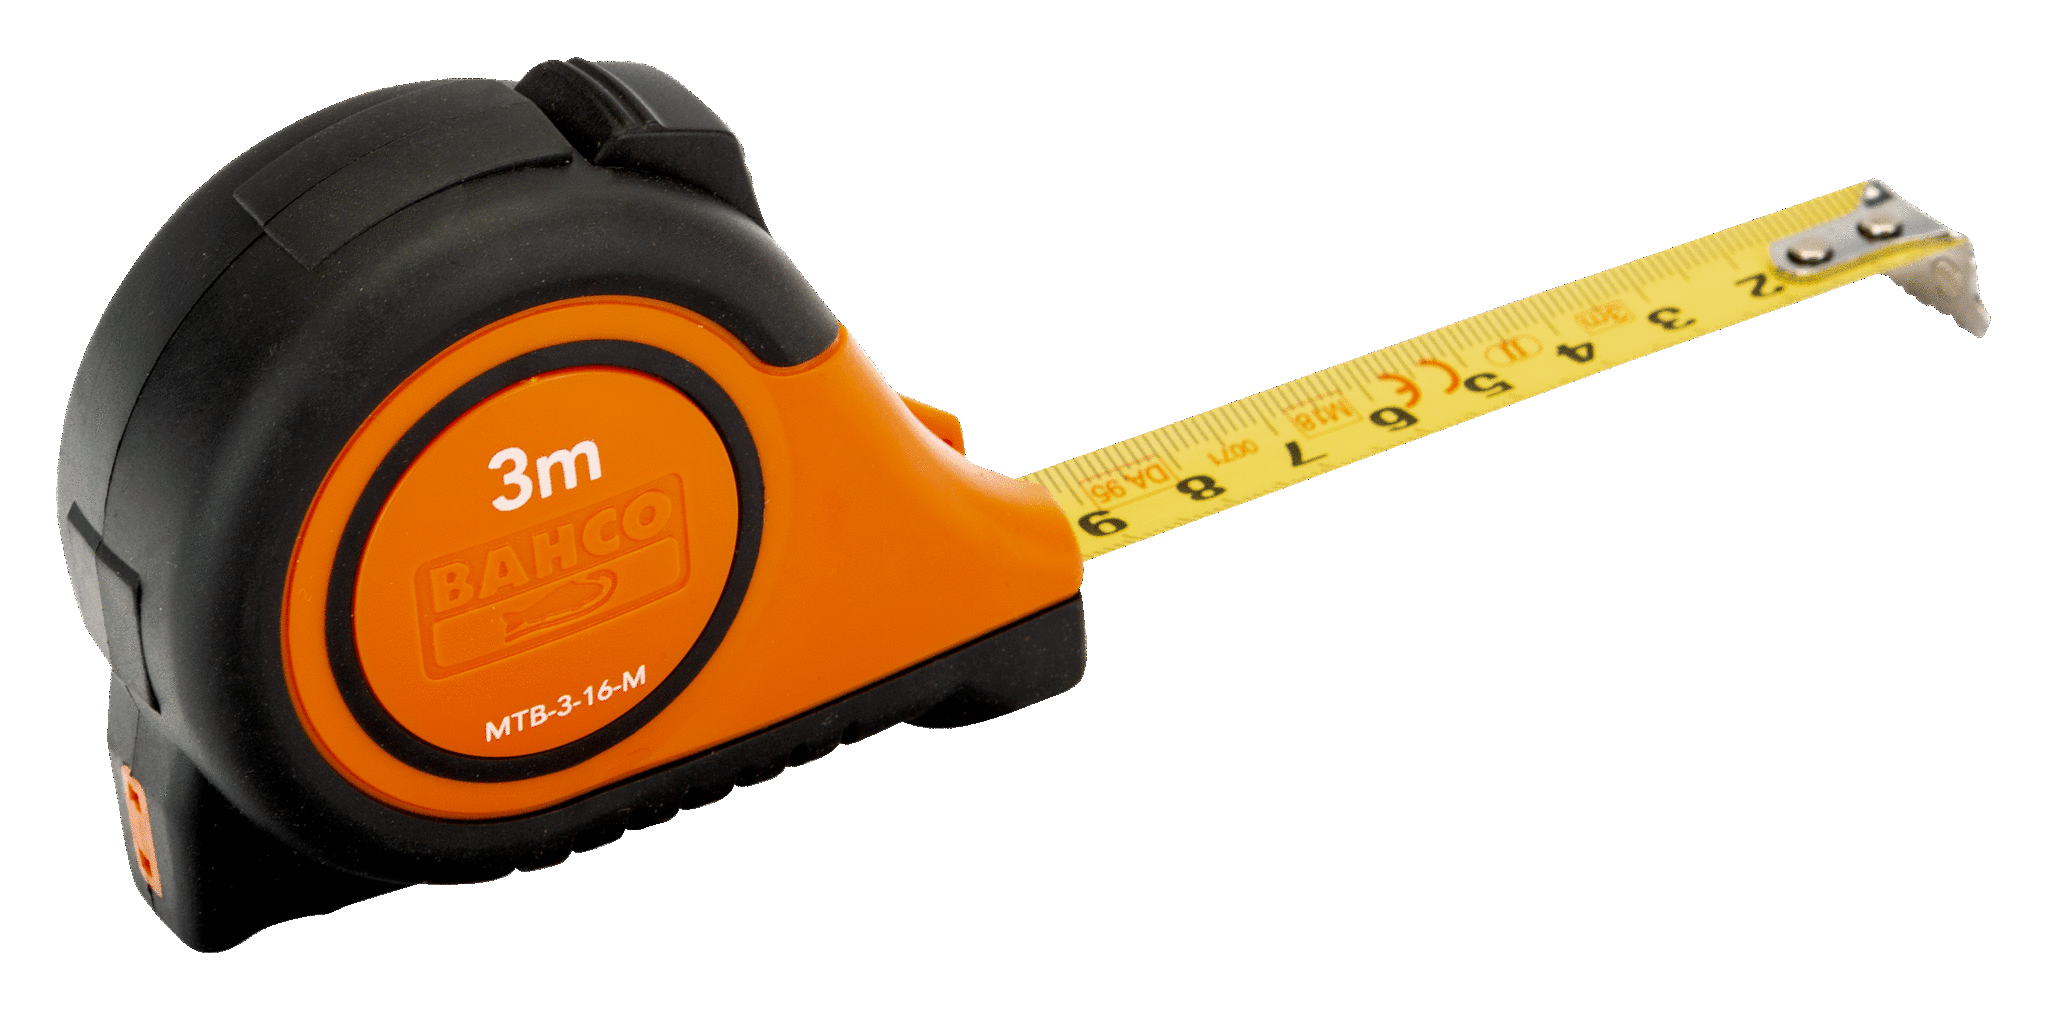 Bahco Bahco MTB-5-25 Metric Only EC Class1 Tape Measure Discontinued now by Bahco 